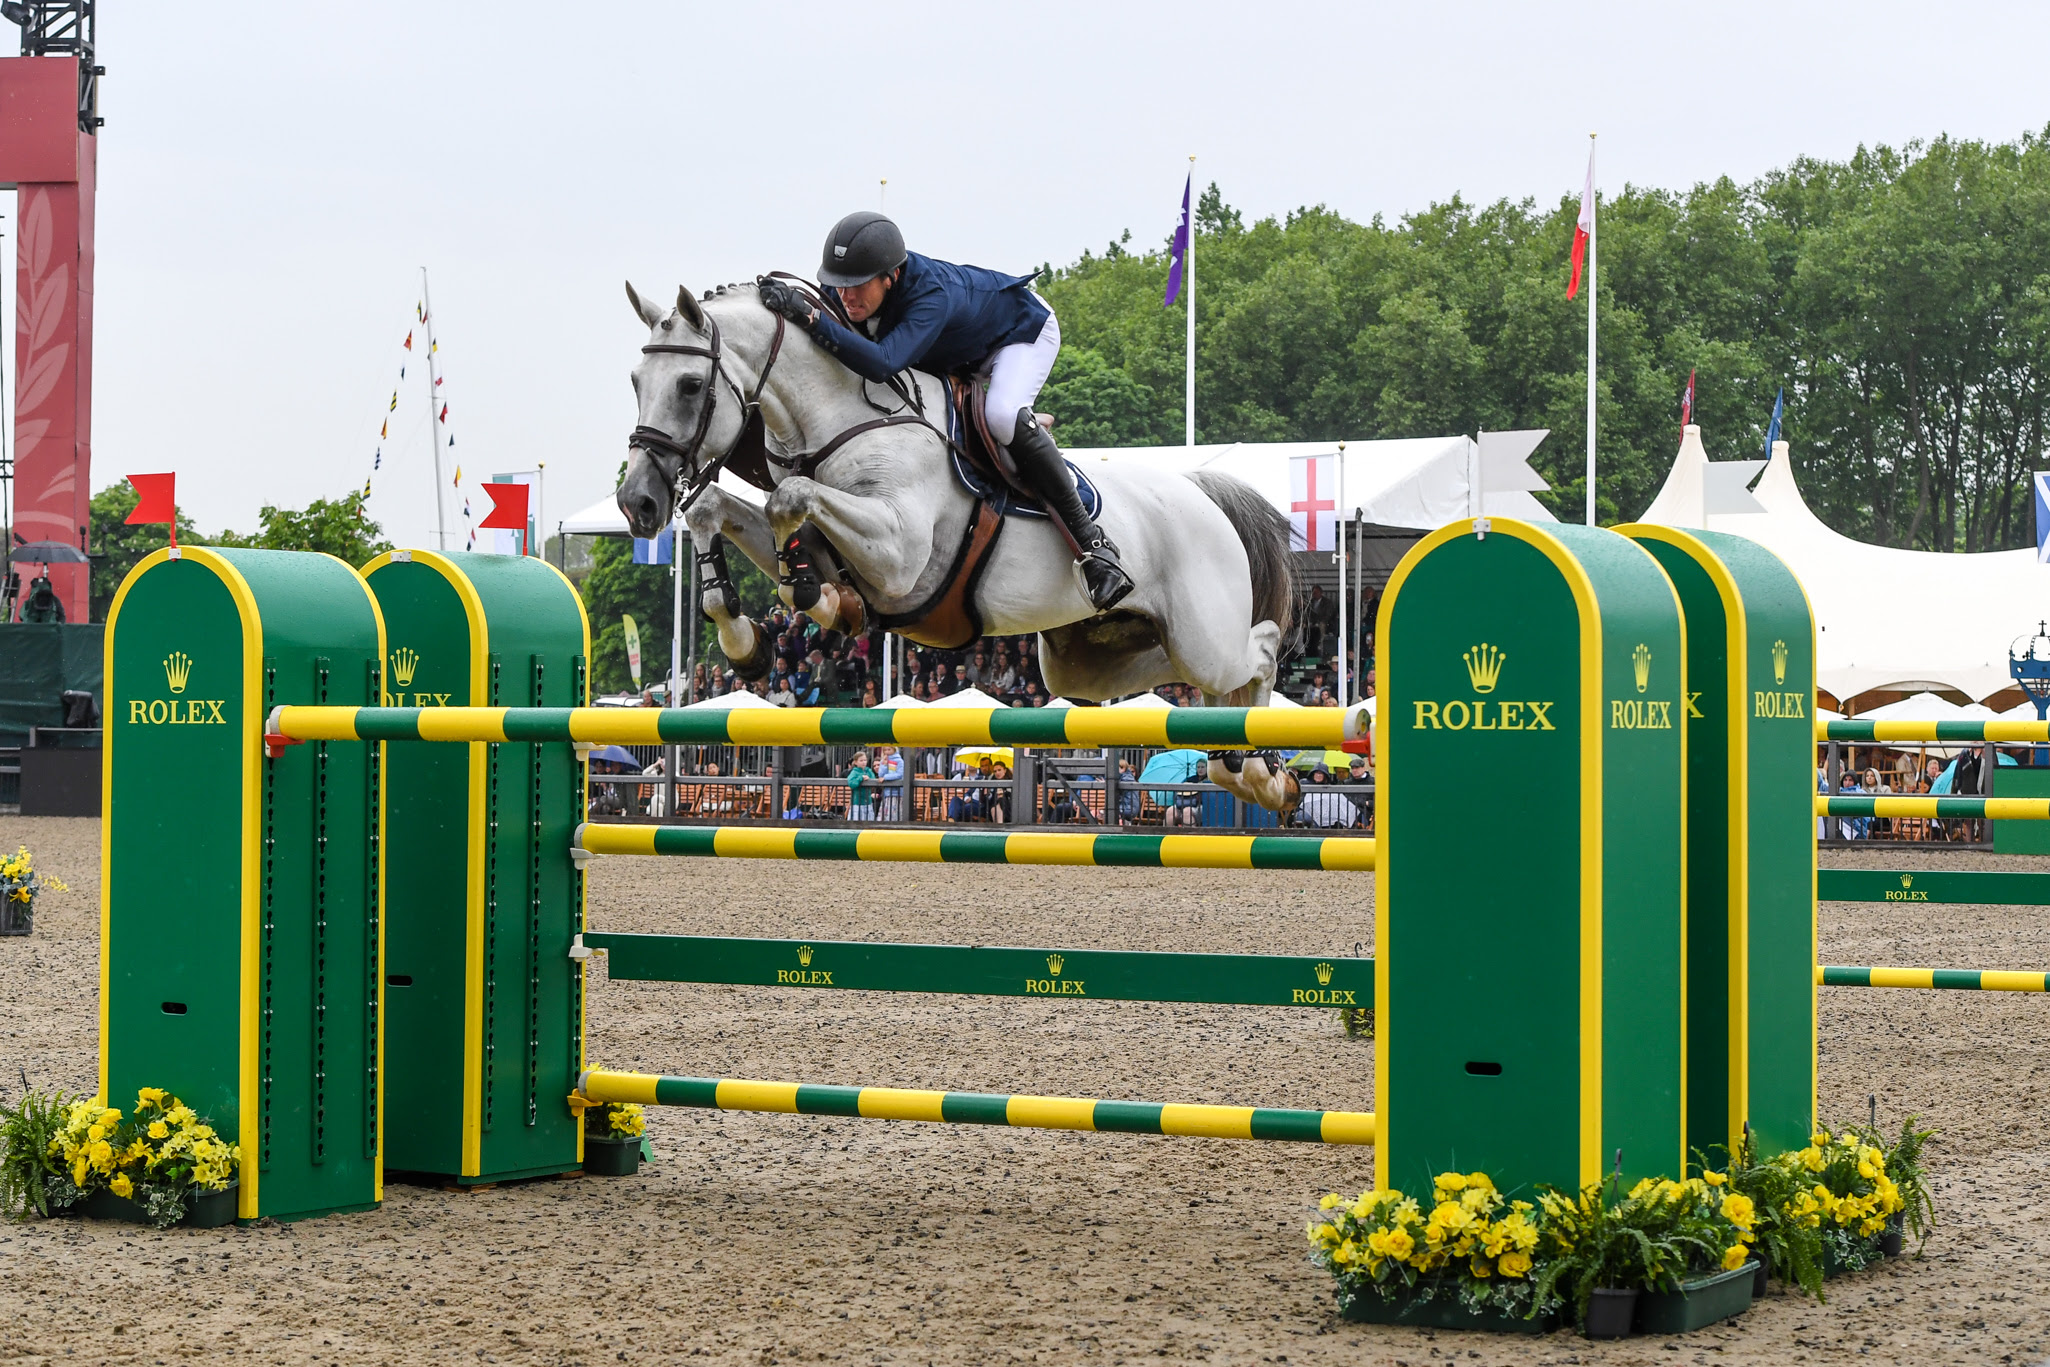 How to watch Windsor Horse Show if youre unable to attend in person